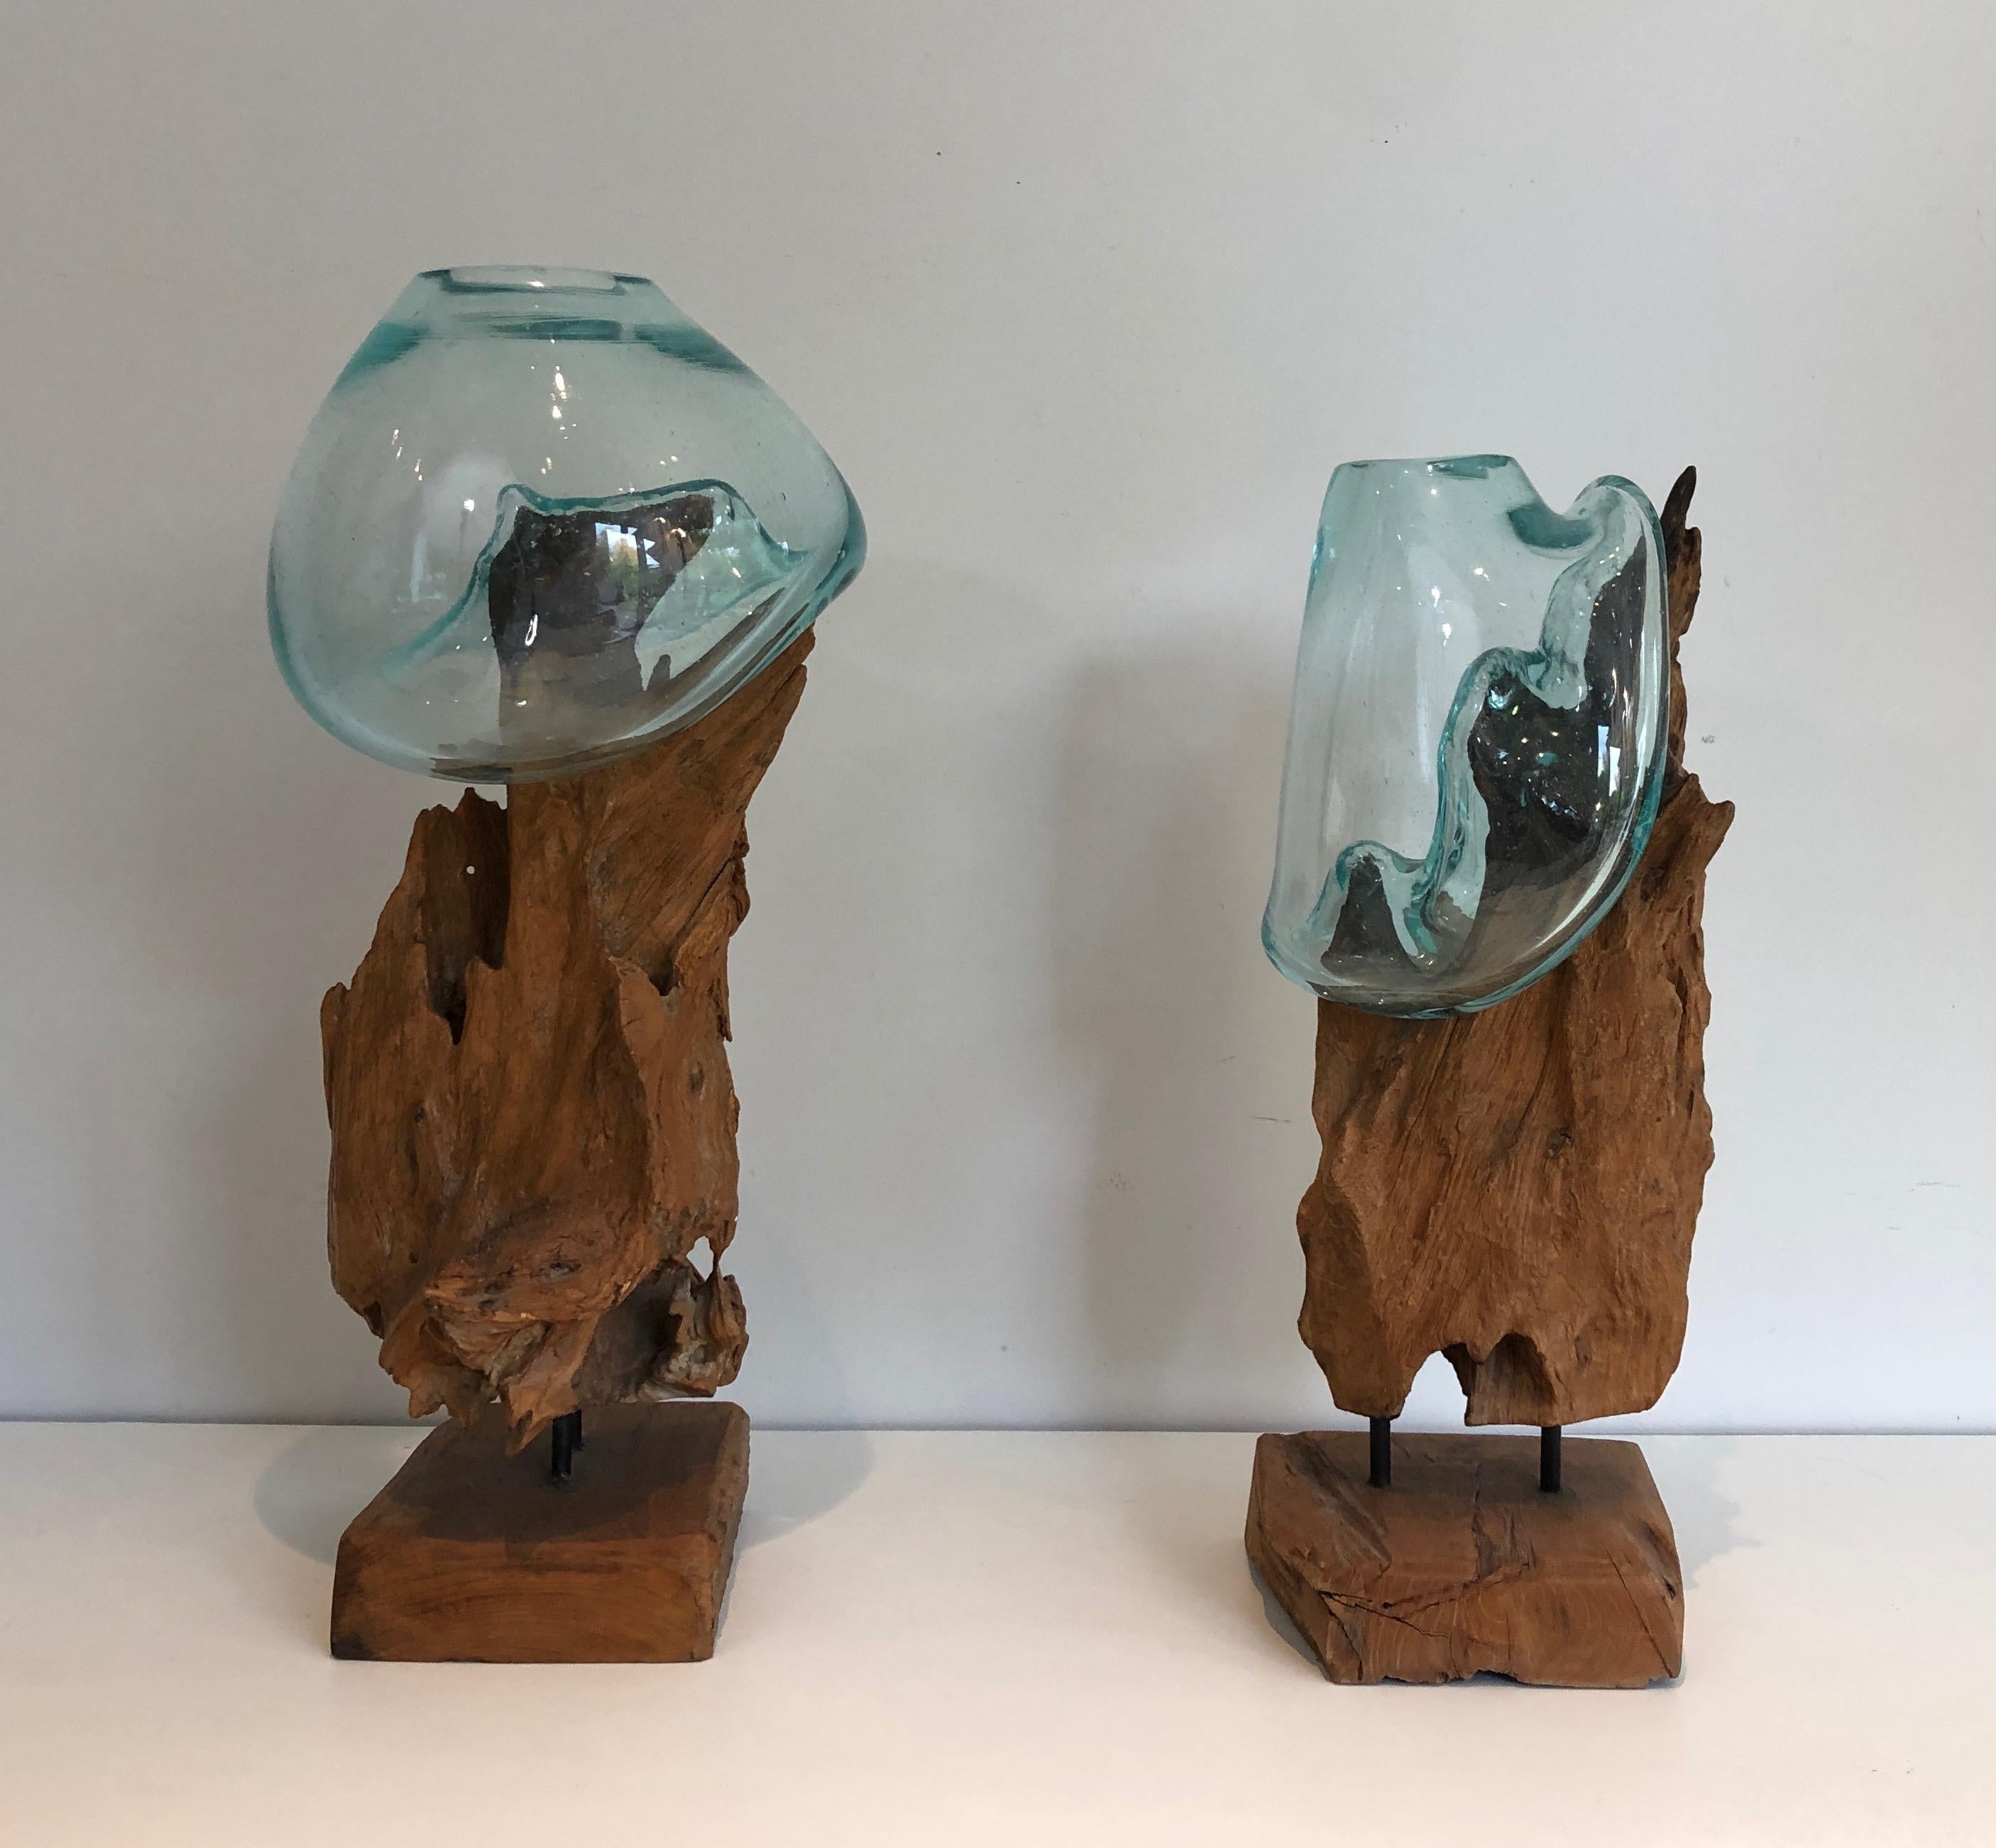 This pair of interesting vases is made of wood elements and glass vases. This is a French work, circa 1980.